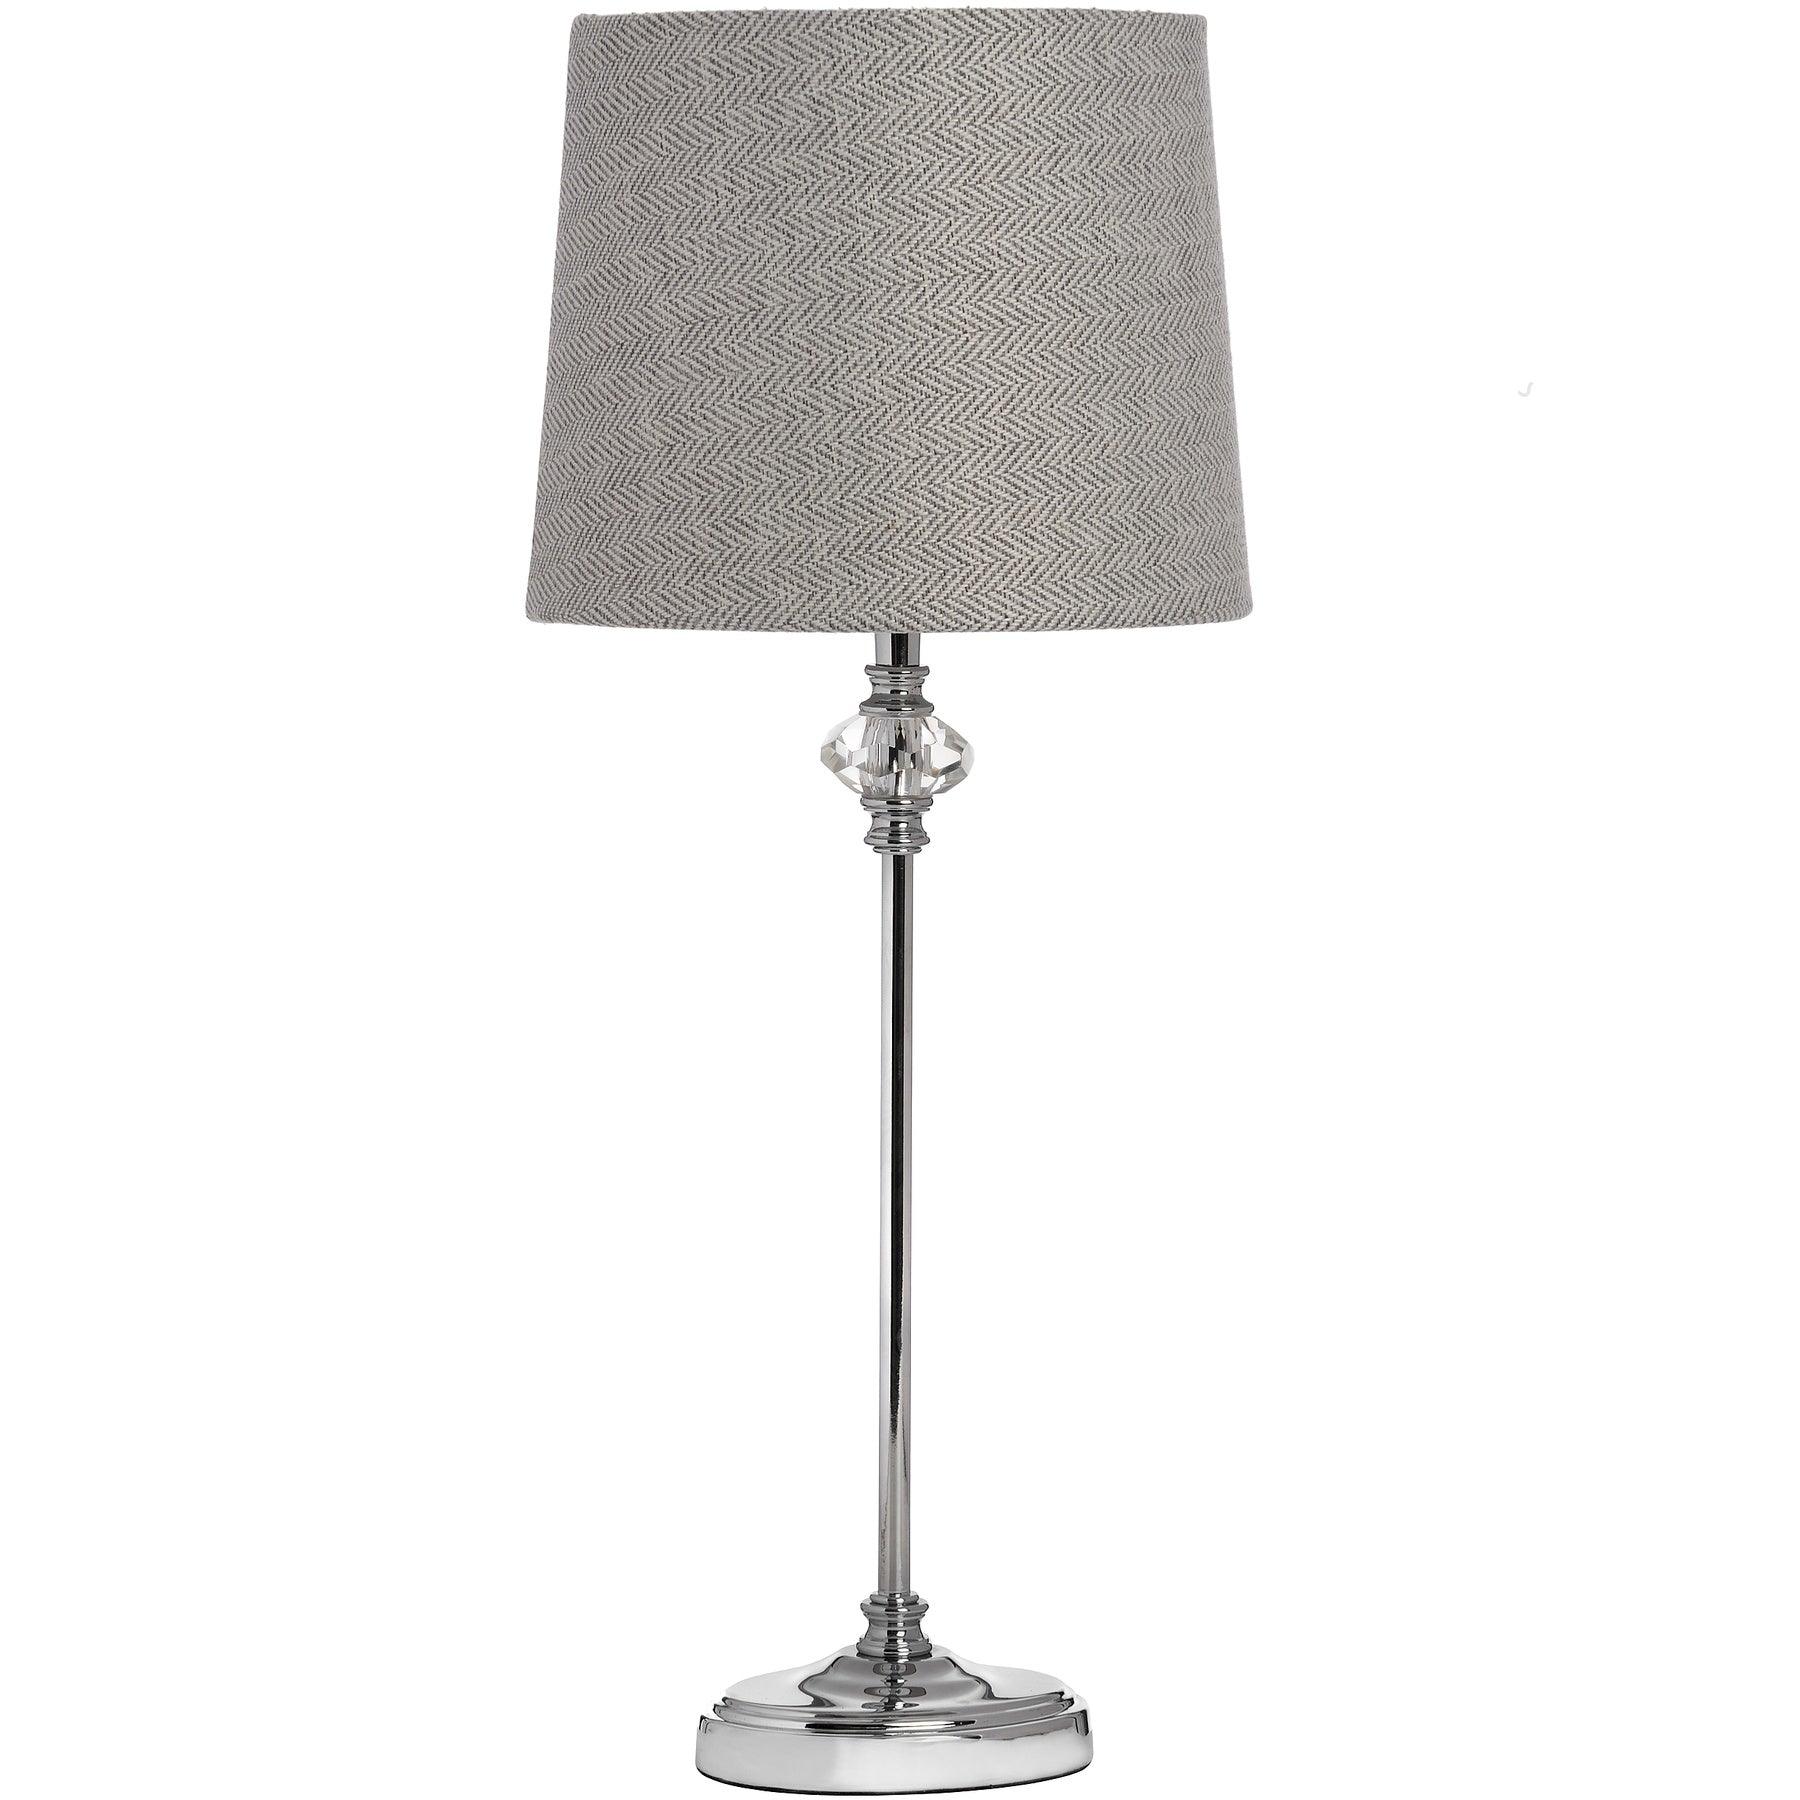 View Florence Chrome Table Lamp information